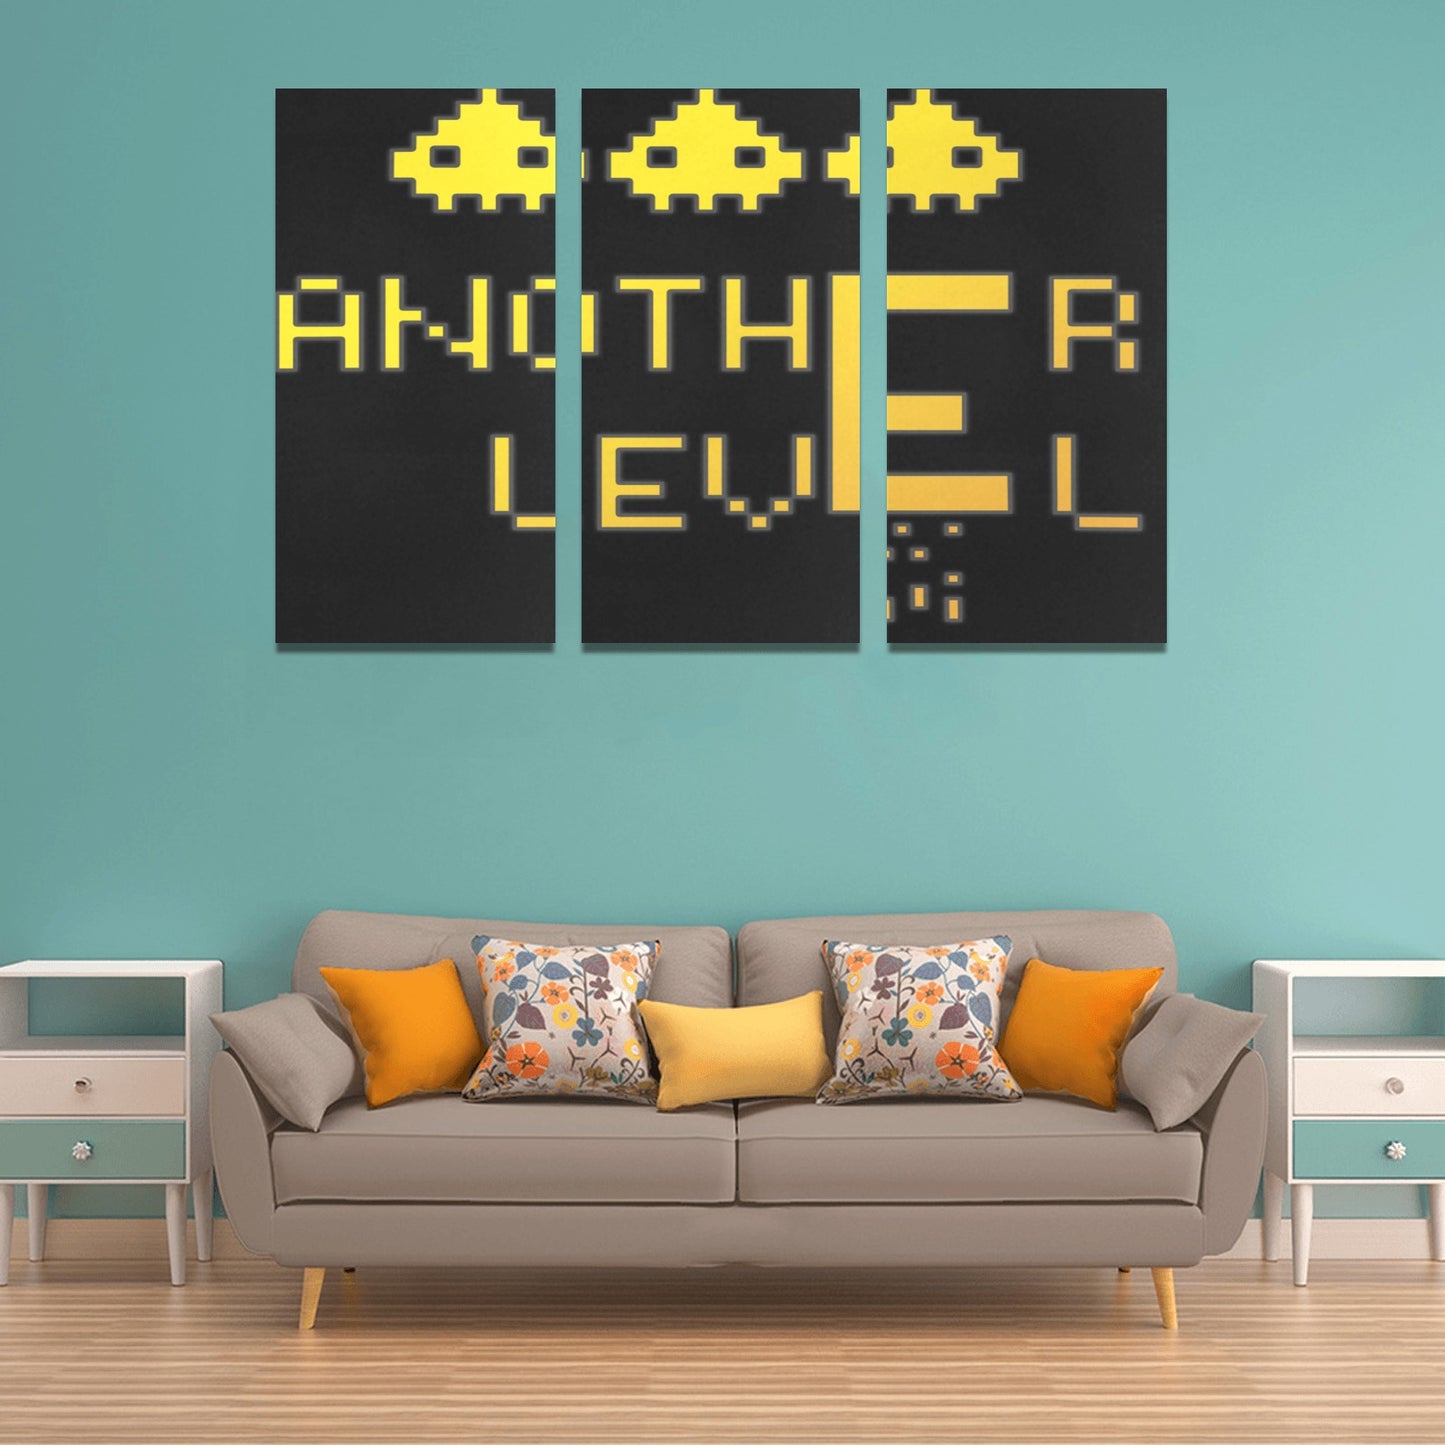 fz design collection too one size / fz another level - yellow too framed canvas art prints set x (3 pieces) (made in usa)